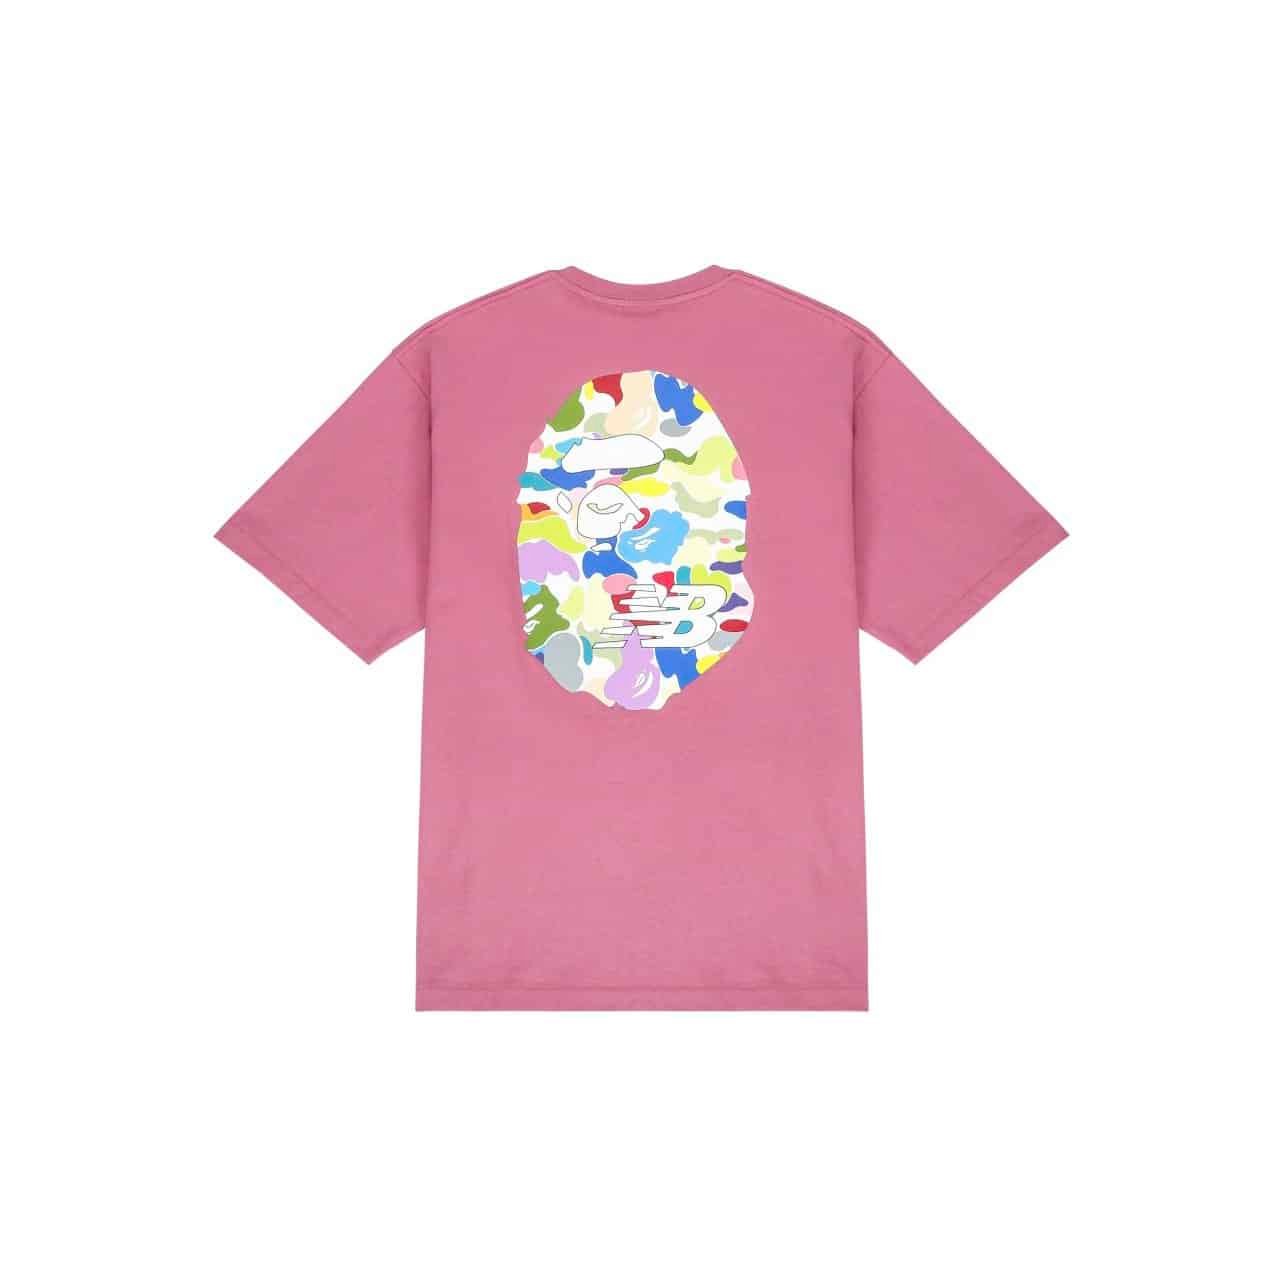 BAPE x New Balance Ape Head Relaxed Fit Tee ( Red ) - 88YungPlug ...